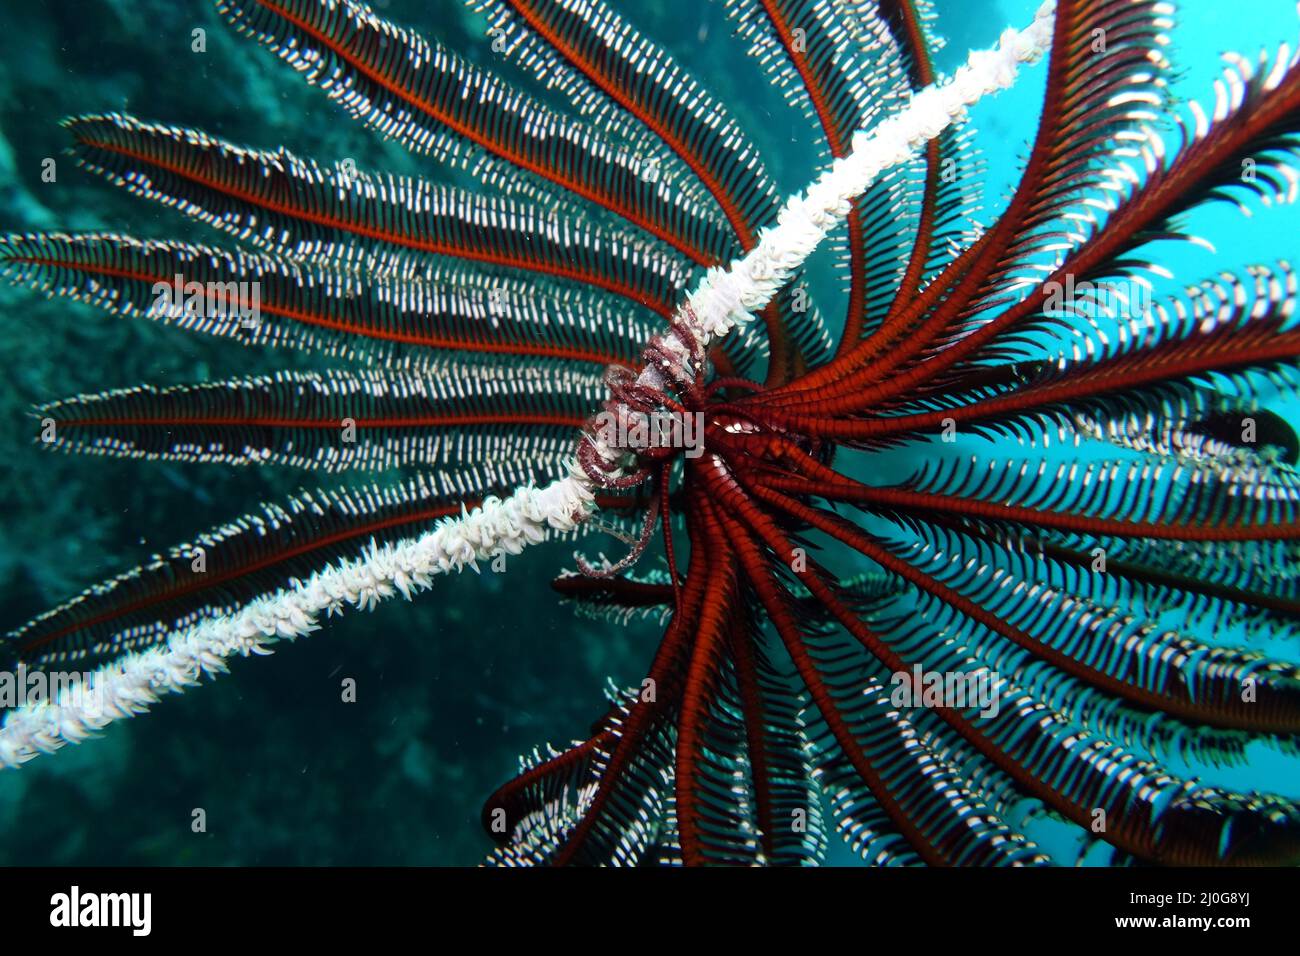 Hairy star, feather star or sea lily on the coral reef Stock Photo